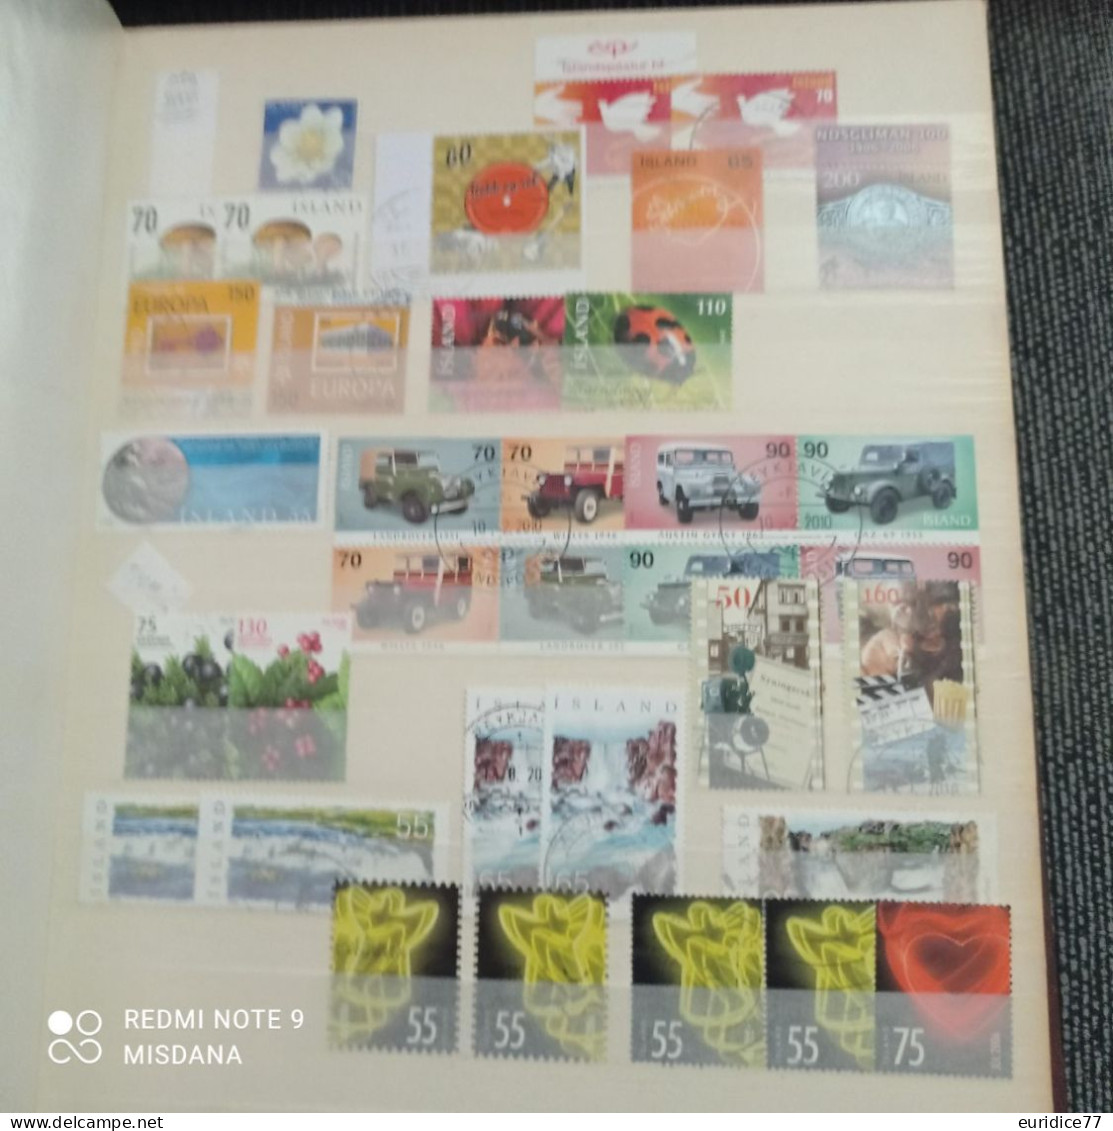 Iceland stamps collection 1873-2015 High value catalogue